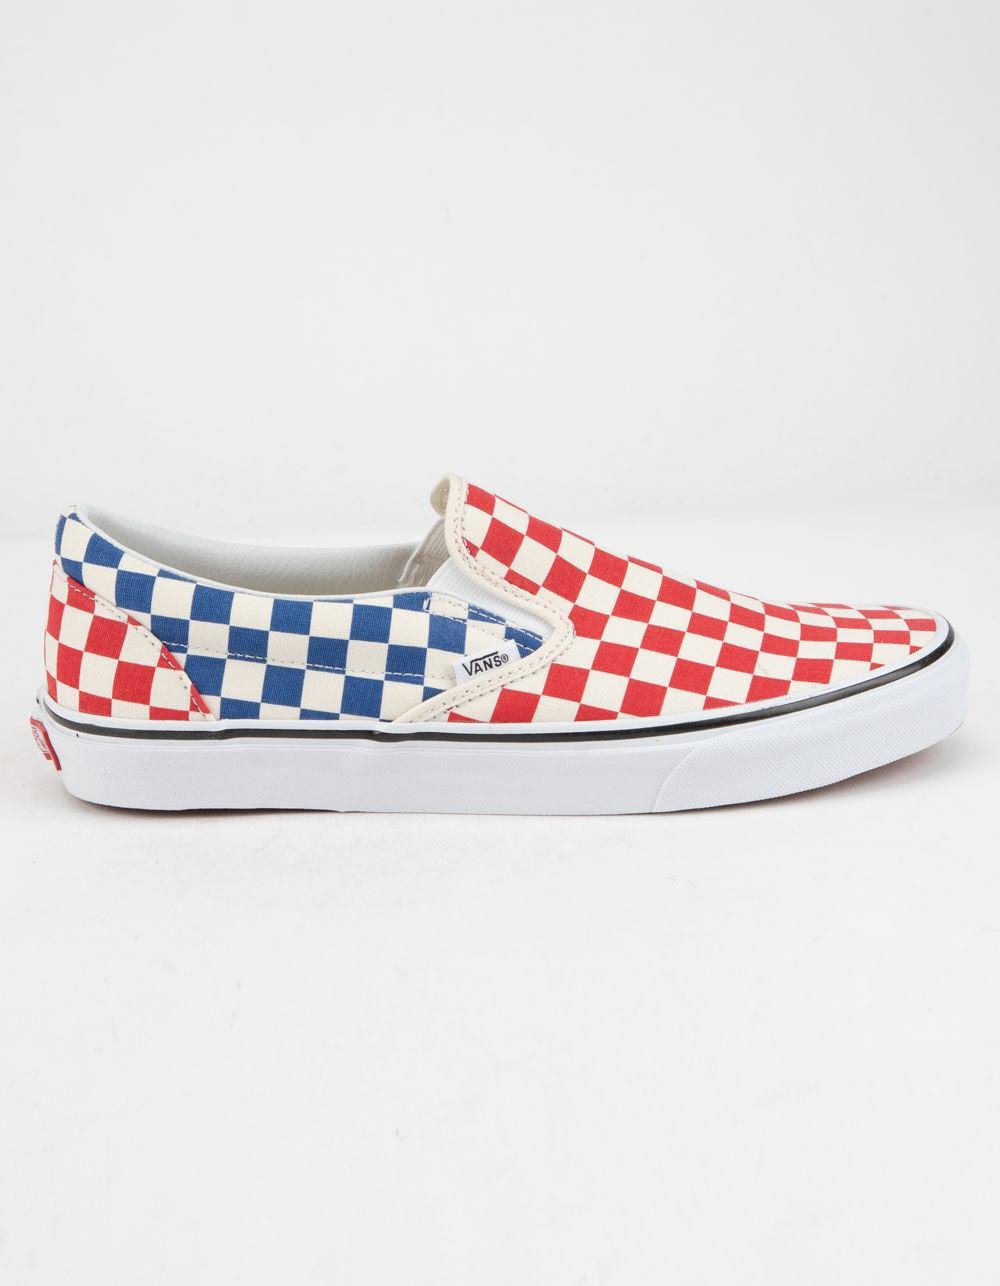 red checkerboard vans tilly's